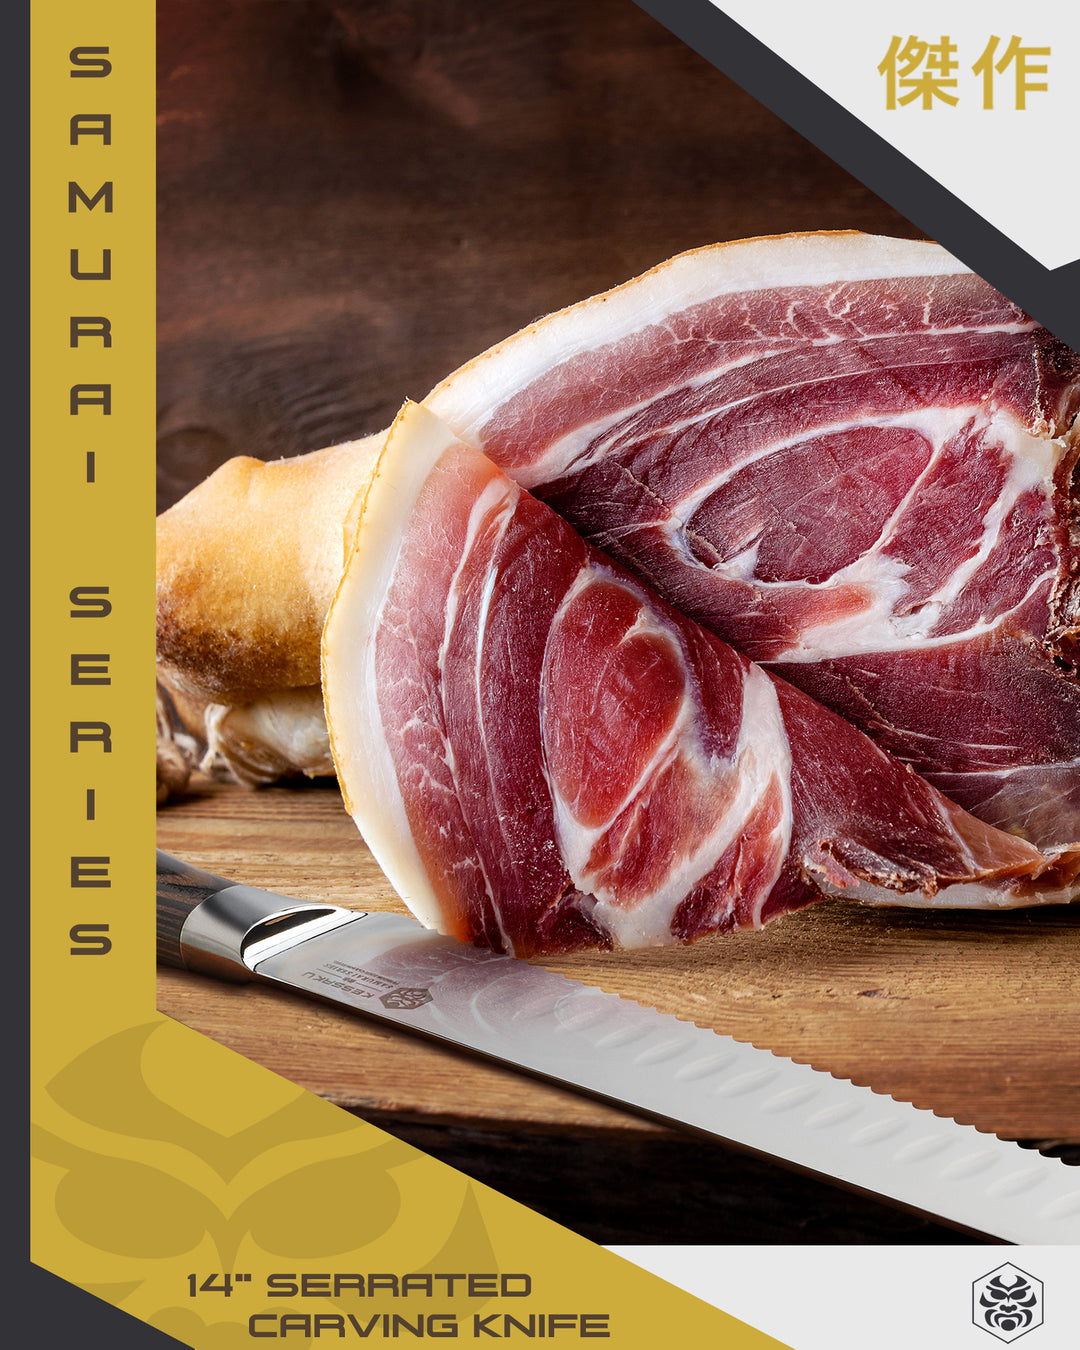 jamon sliced to show its marbling with the serrated carving knife